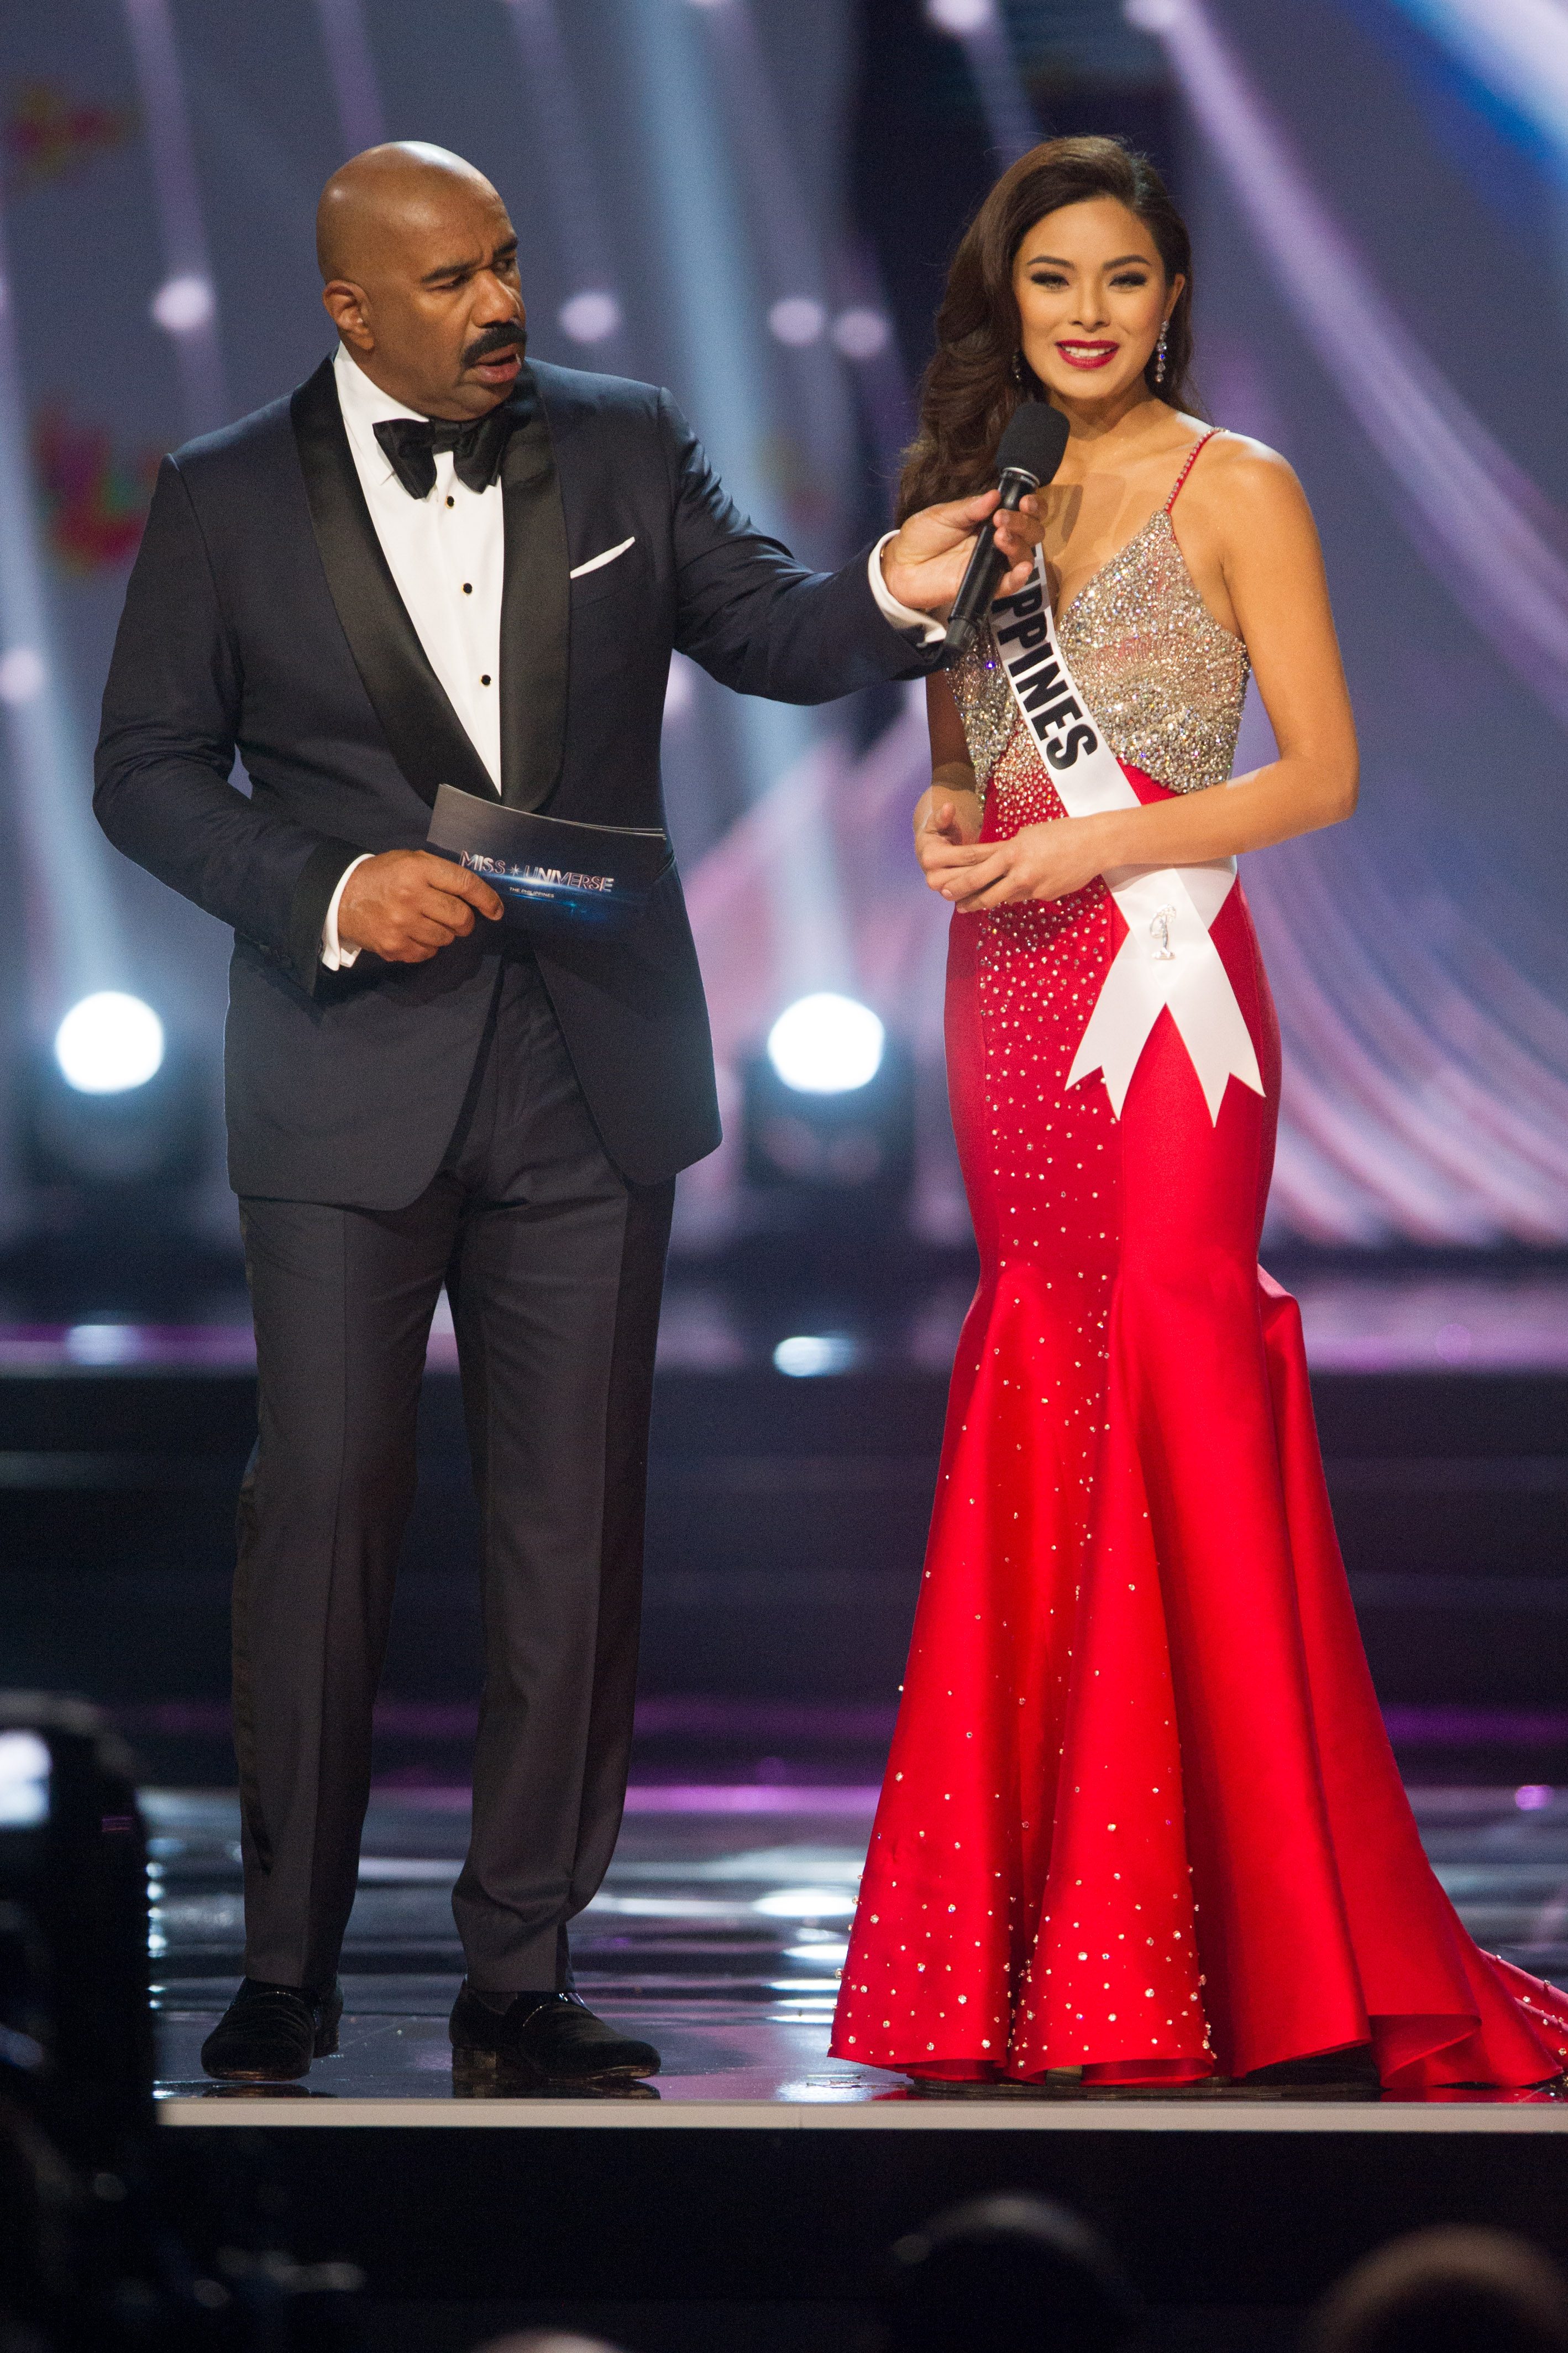 Maxine Medina, Miss Philippines 2016 answers her Top 6 Question on stage with Host, Steve Harvey during The 65th Miss Universe in Manila. HO/The Miss Universe Organization 